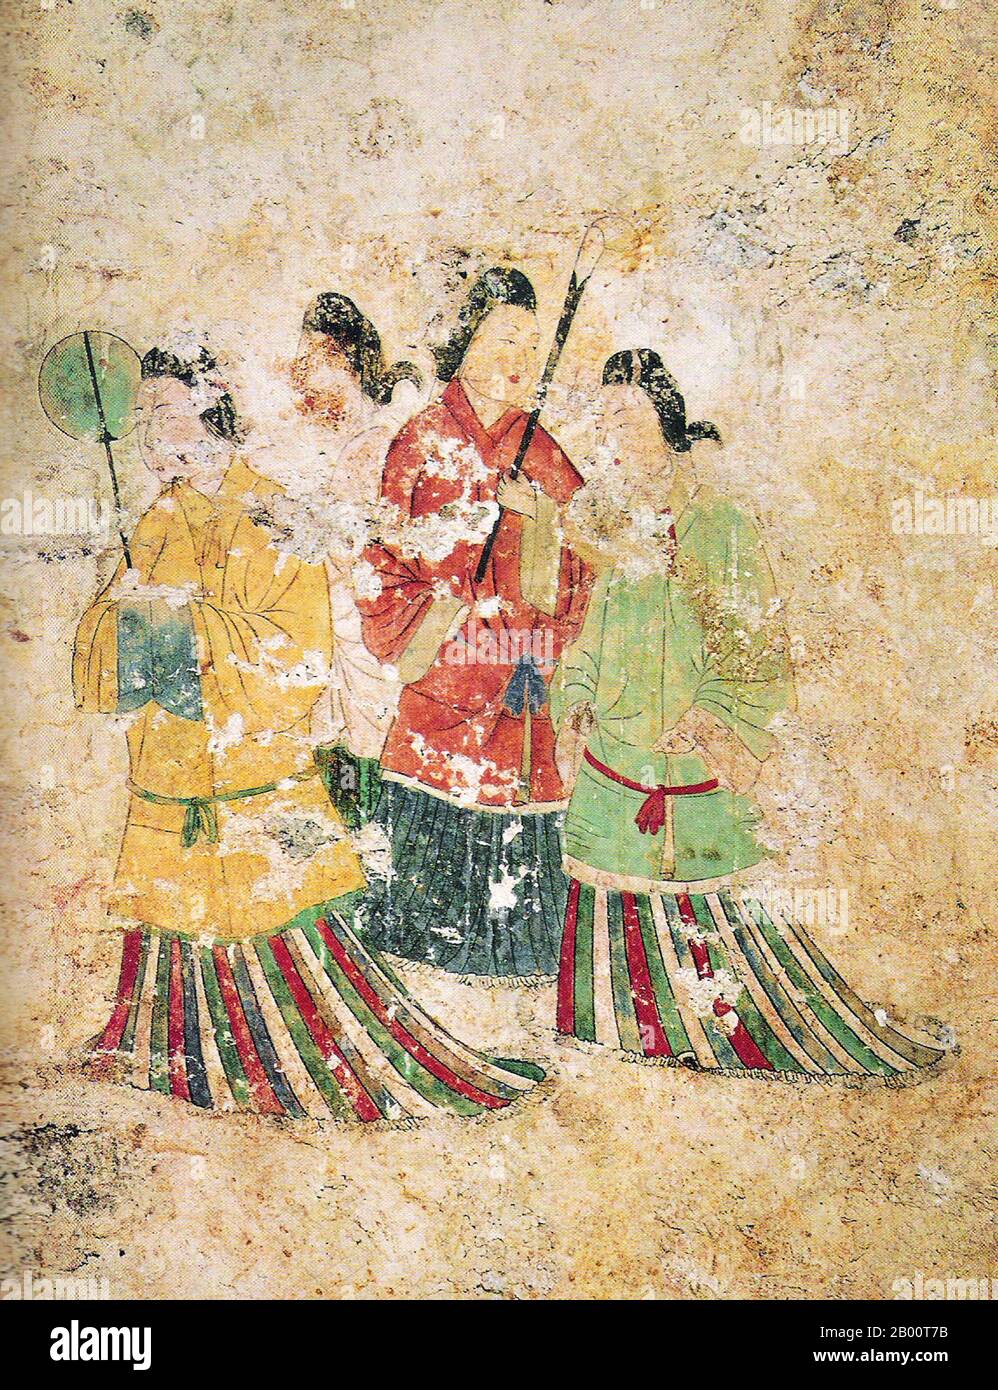 Japan: The 'Asuka Bijin' or 'Beautiful women of the Asuka Period', Takamatsuzuka Tomb, 6th-7th century CE.  The Takamatsuzuka Tomb (Takamatsuzuka Kofun or 'Tall Pine Tree Ancient Burial Mound' is an ancient circular tomb in Asuka village, Nara prefecture, Japan. Dating from the 6th-7th century CE, it contains painted fresco wall paintings of courtiers in Goguryeo-style garb.  The paintings are in full color with red, blue, gold, and silver foil representing four male followers and four abigails together with the Azure Dragon, Black Tortoise, White Tiger, and Vermilion Bird groups of stars. Stock Photo